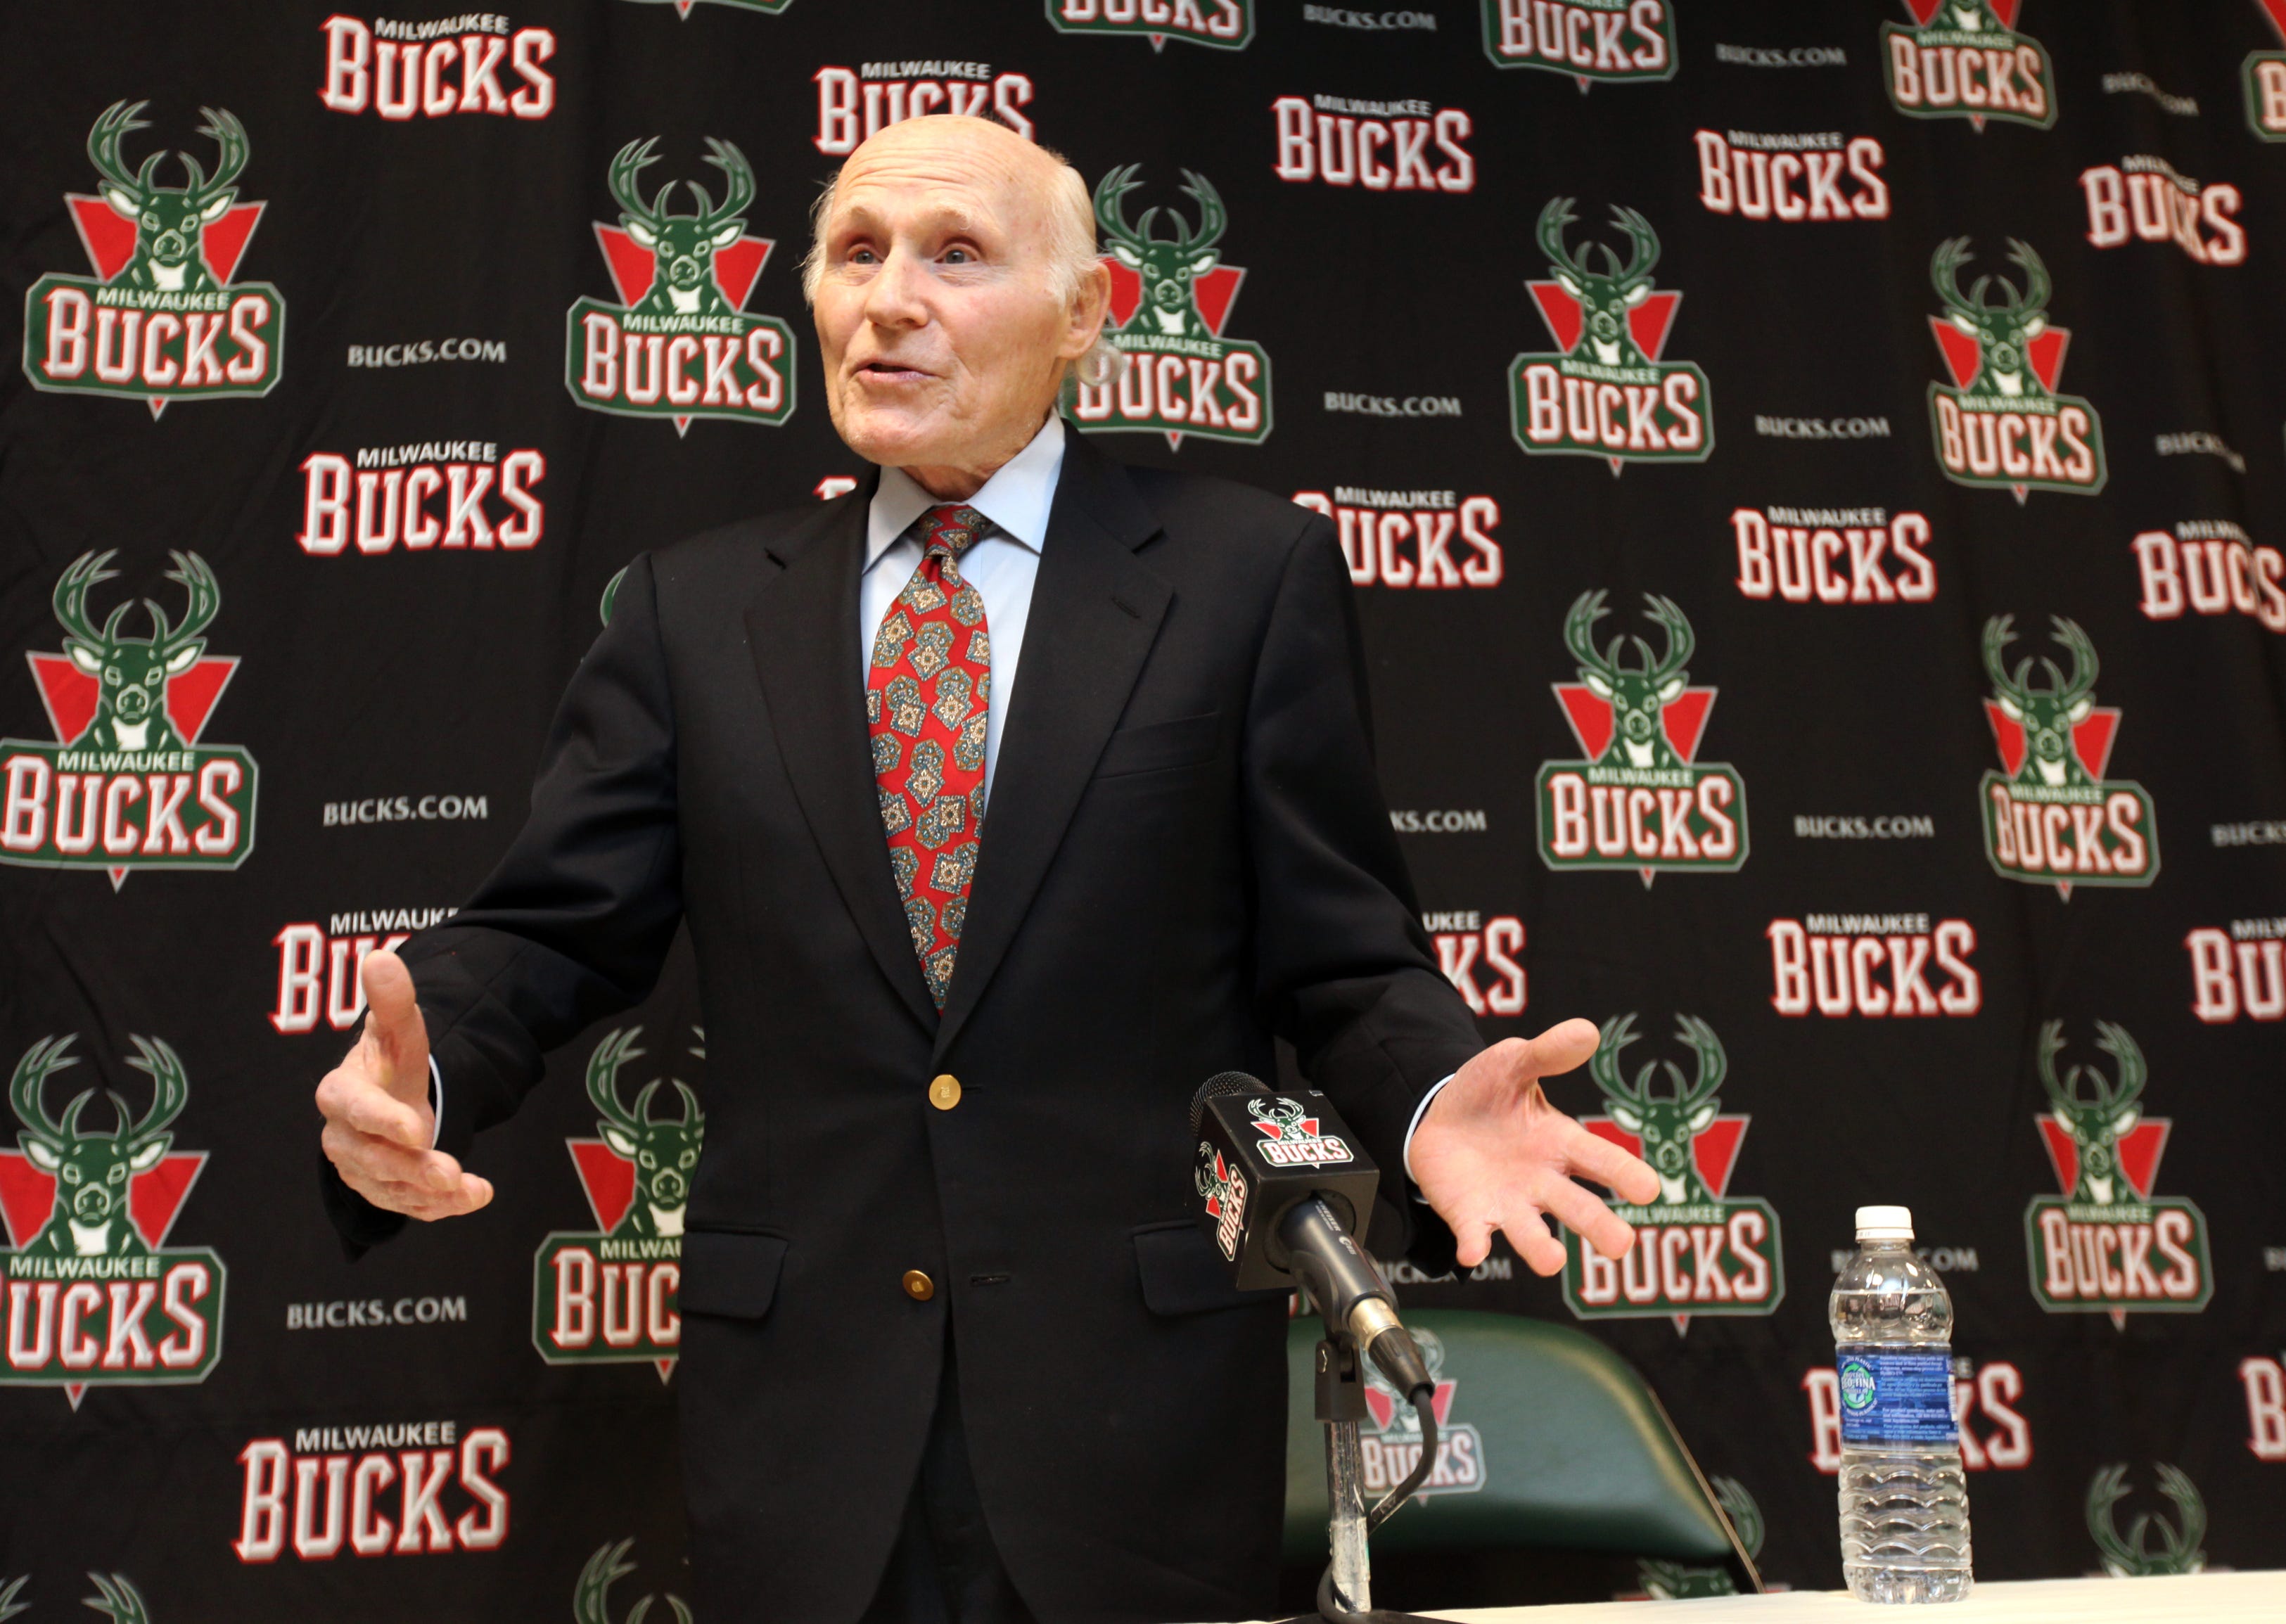 Sen. Herb Kohl owned the Bucks for 29 years and announced at the end of the 2014 season he was selling the team.